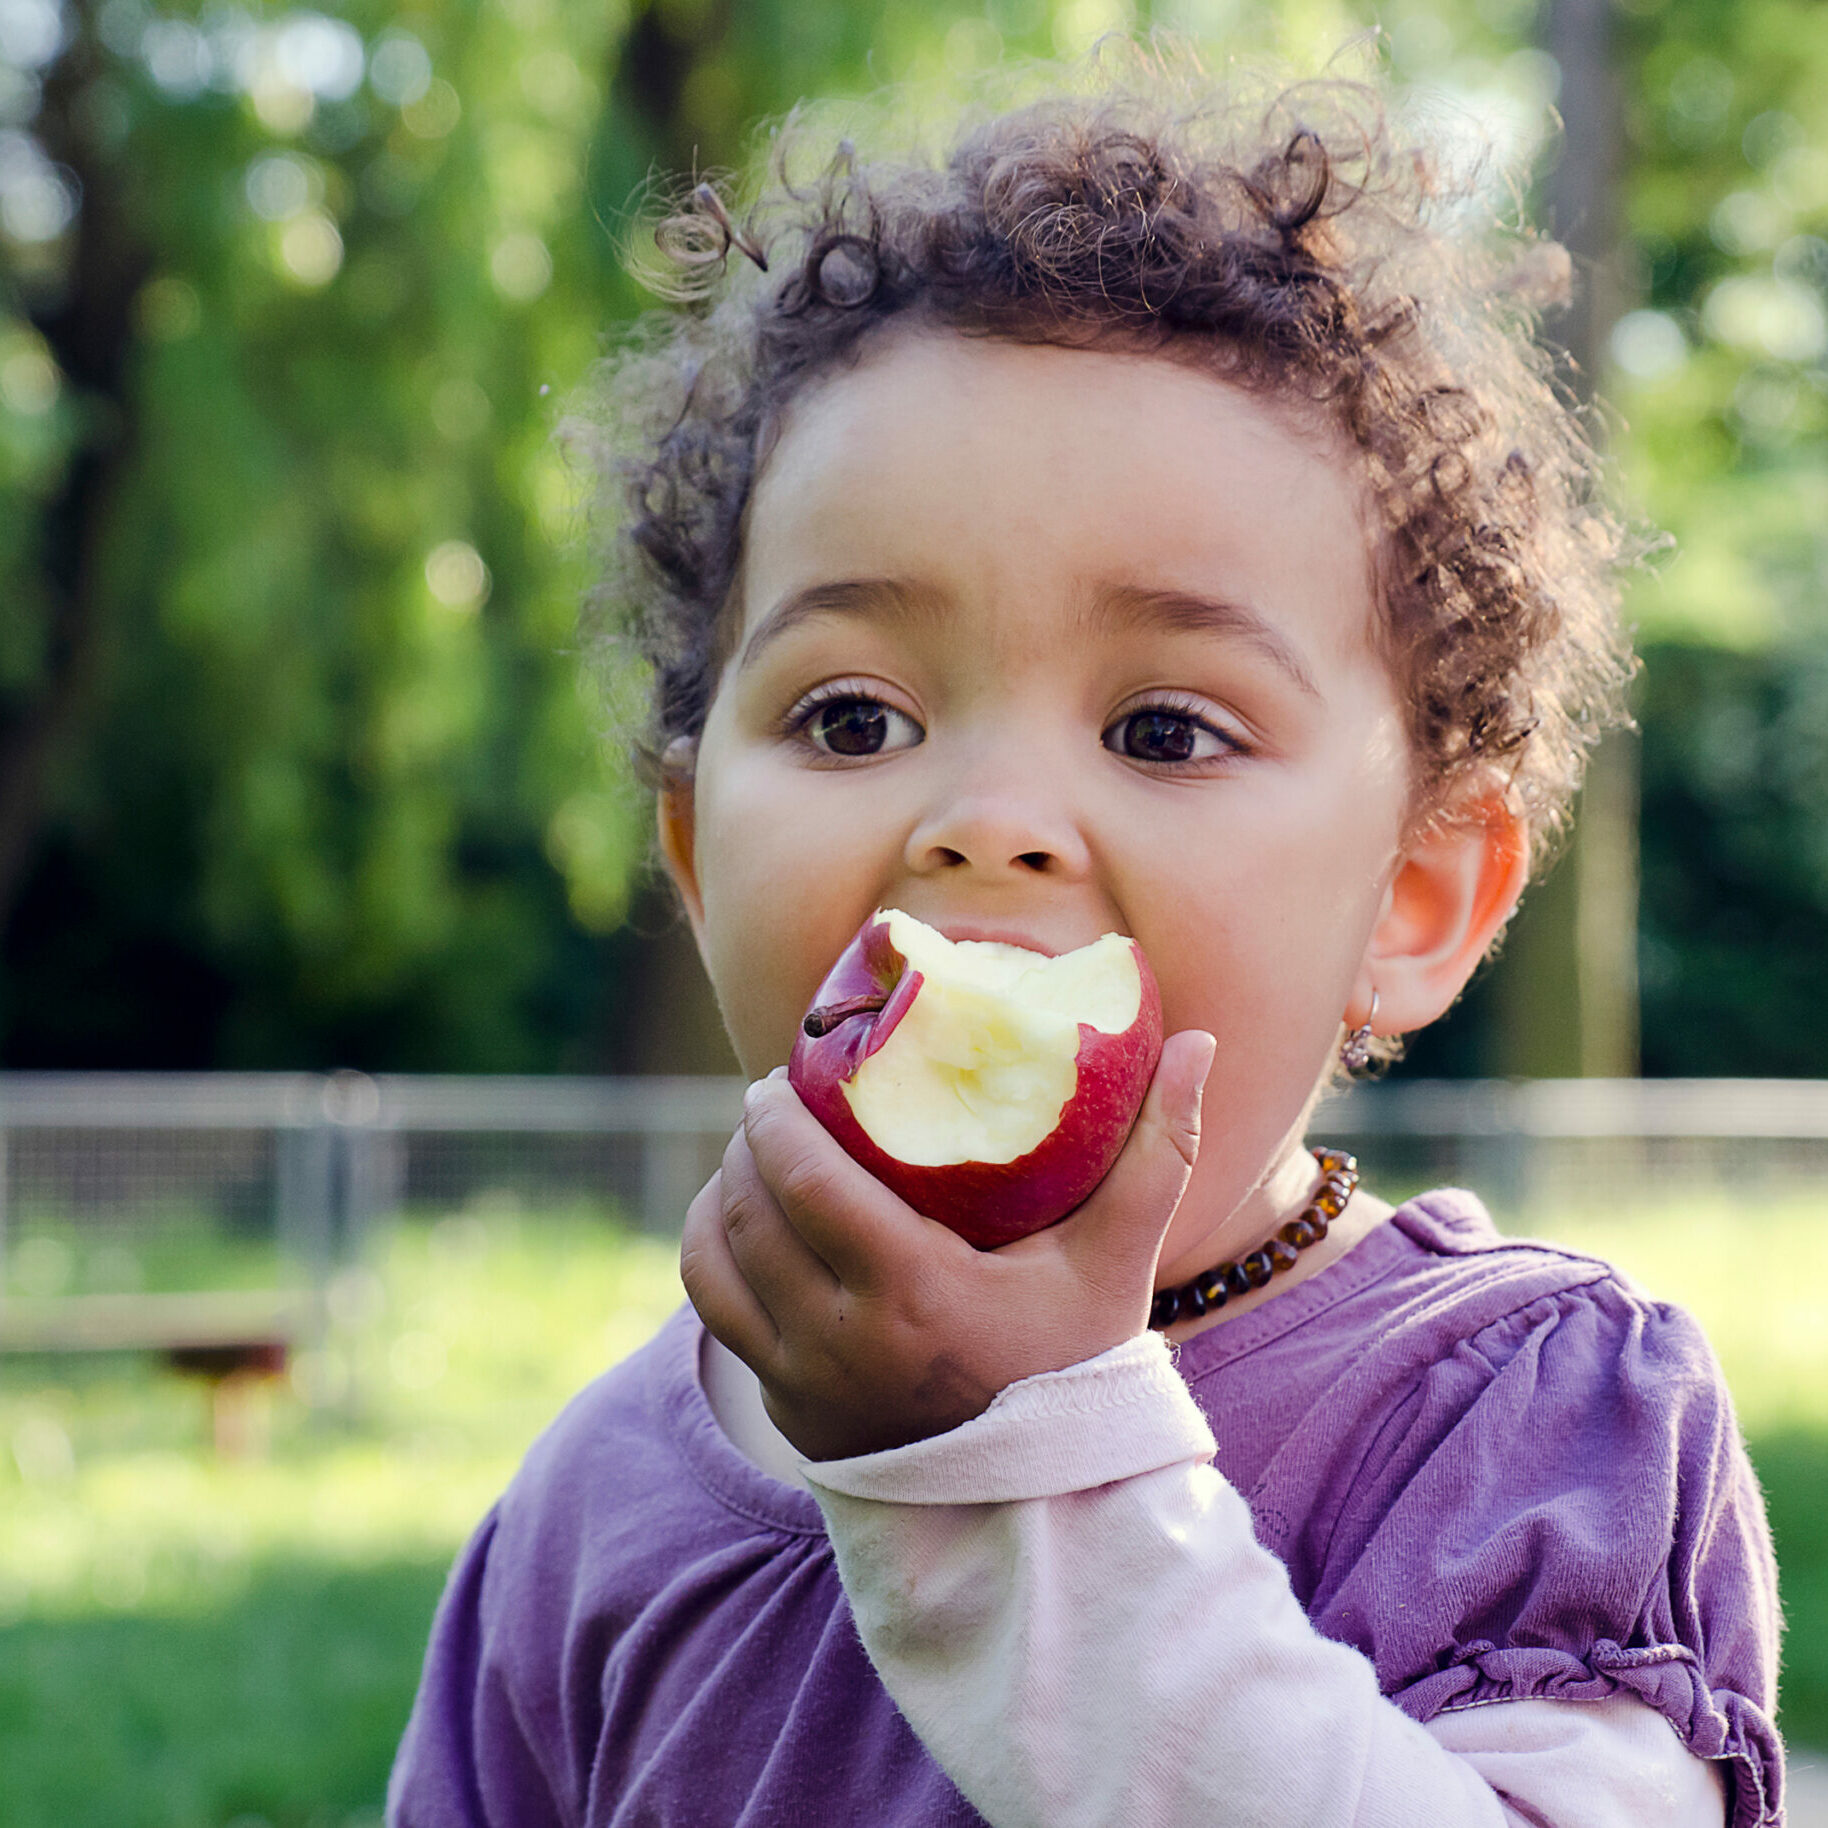 Child child eating an apple in a park in nature.